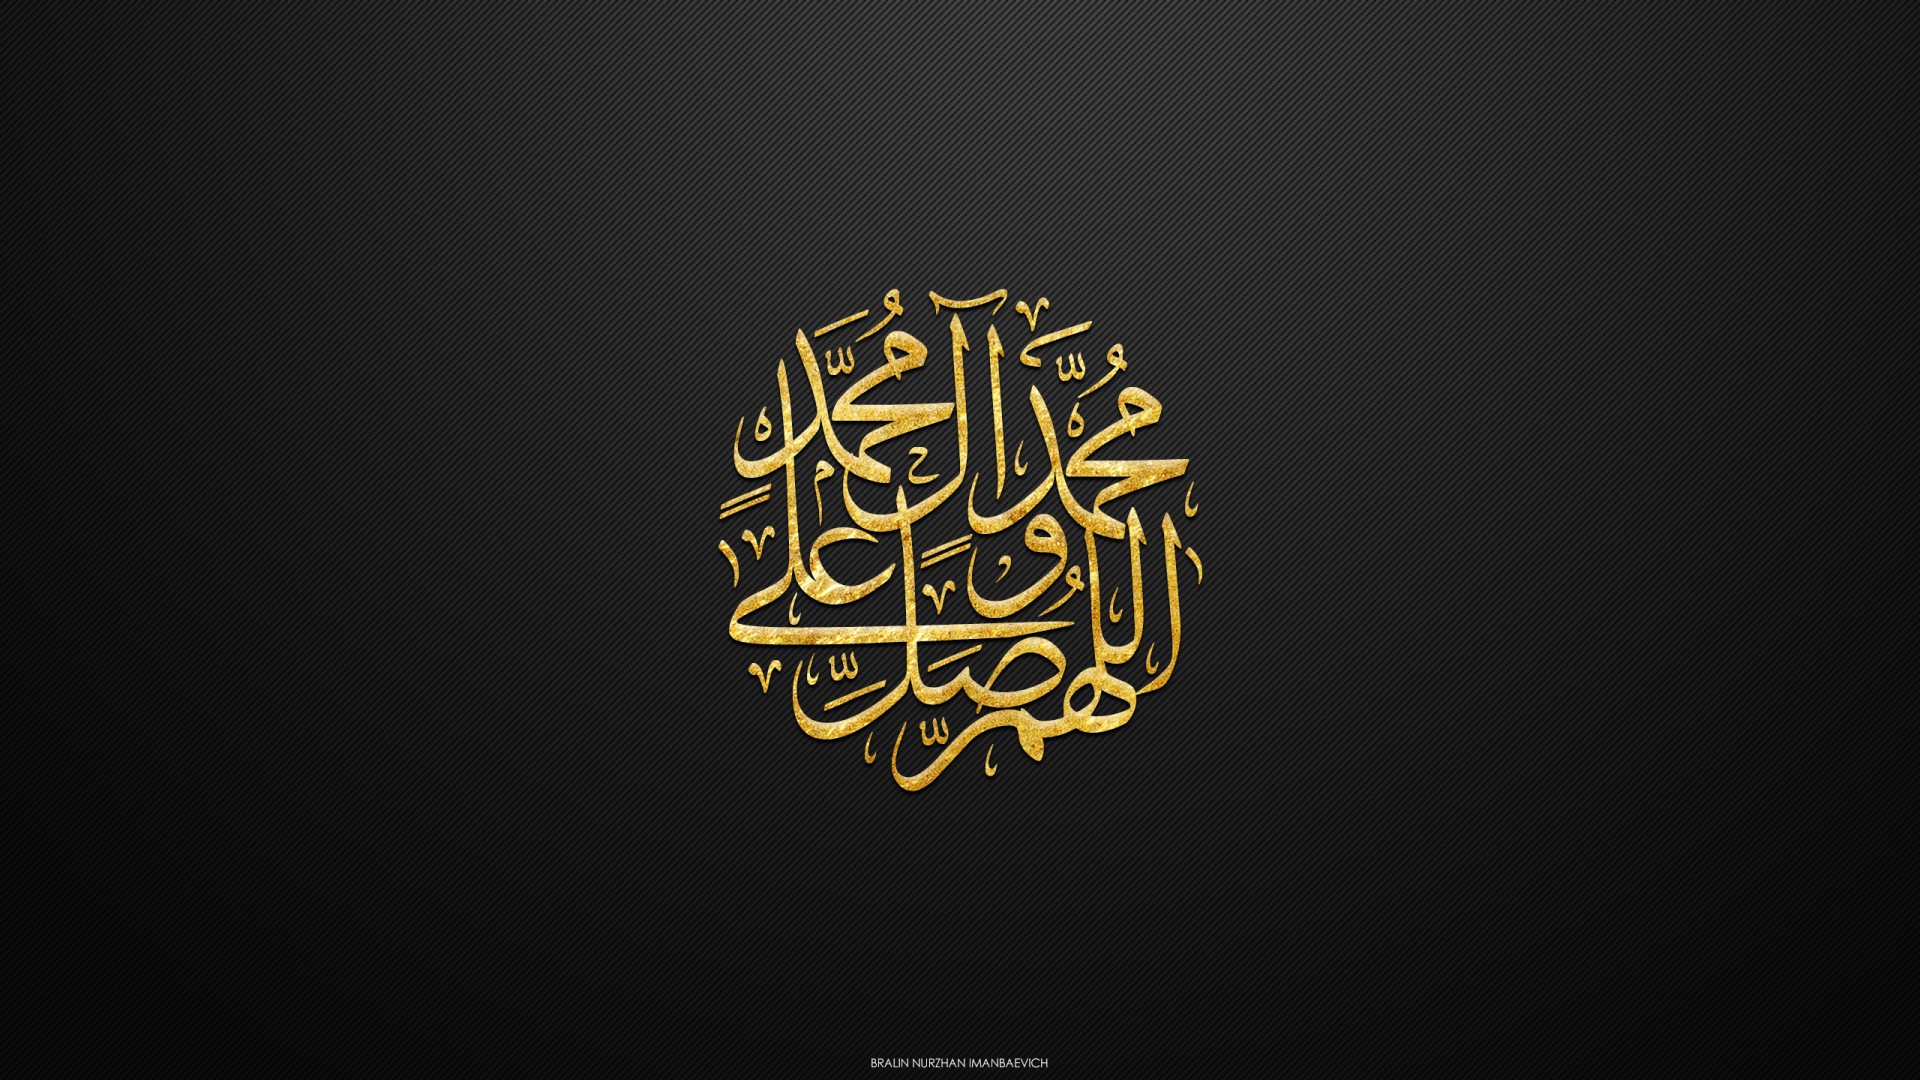 Inscriptions in Arabic wallpapers and images - wallpapers